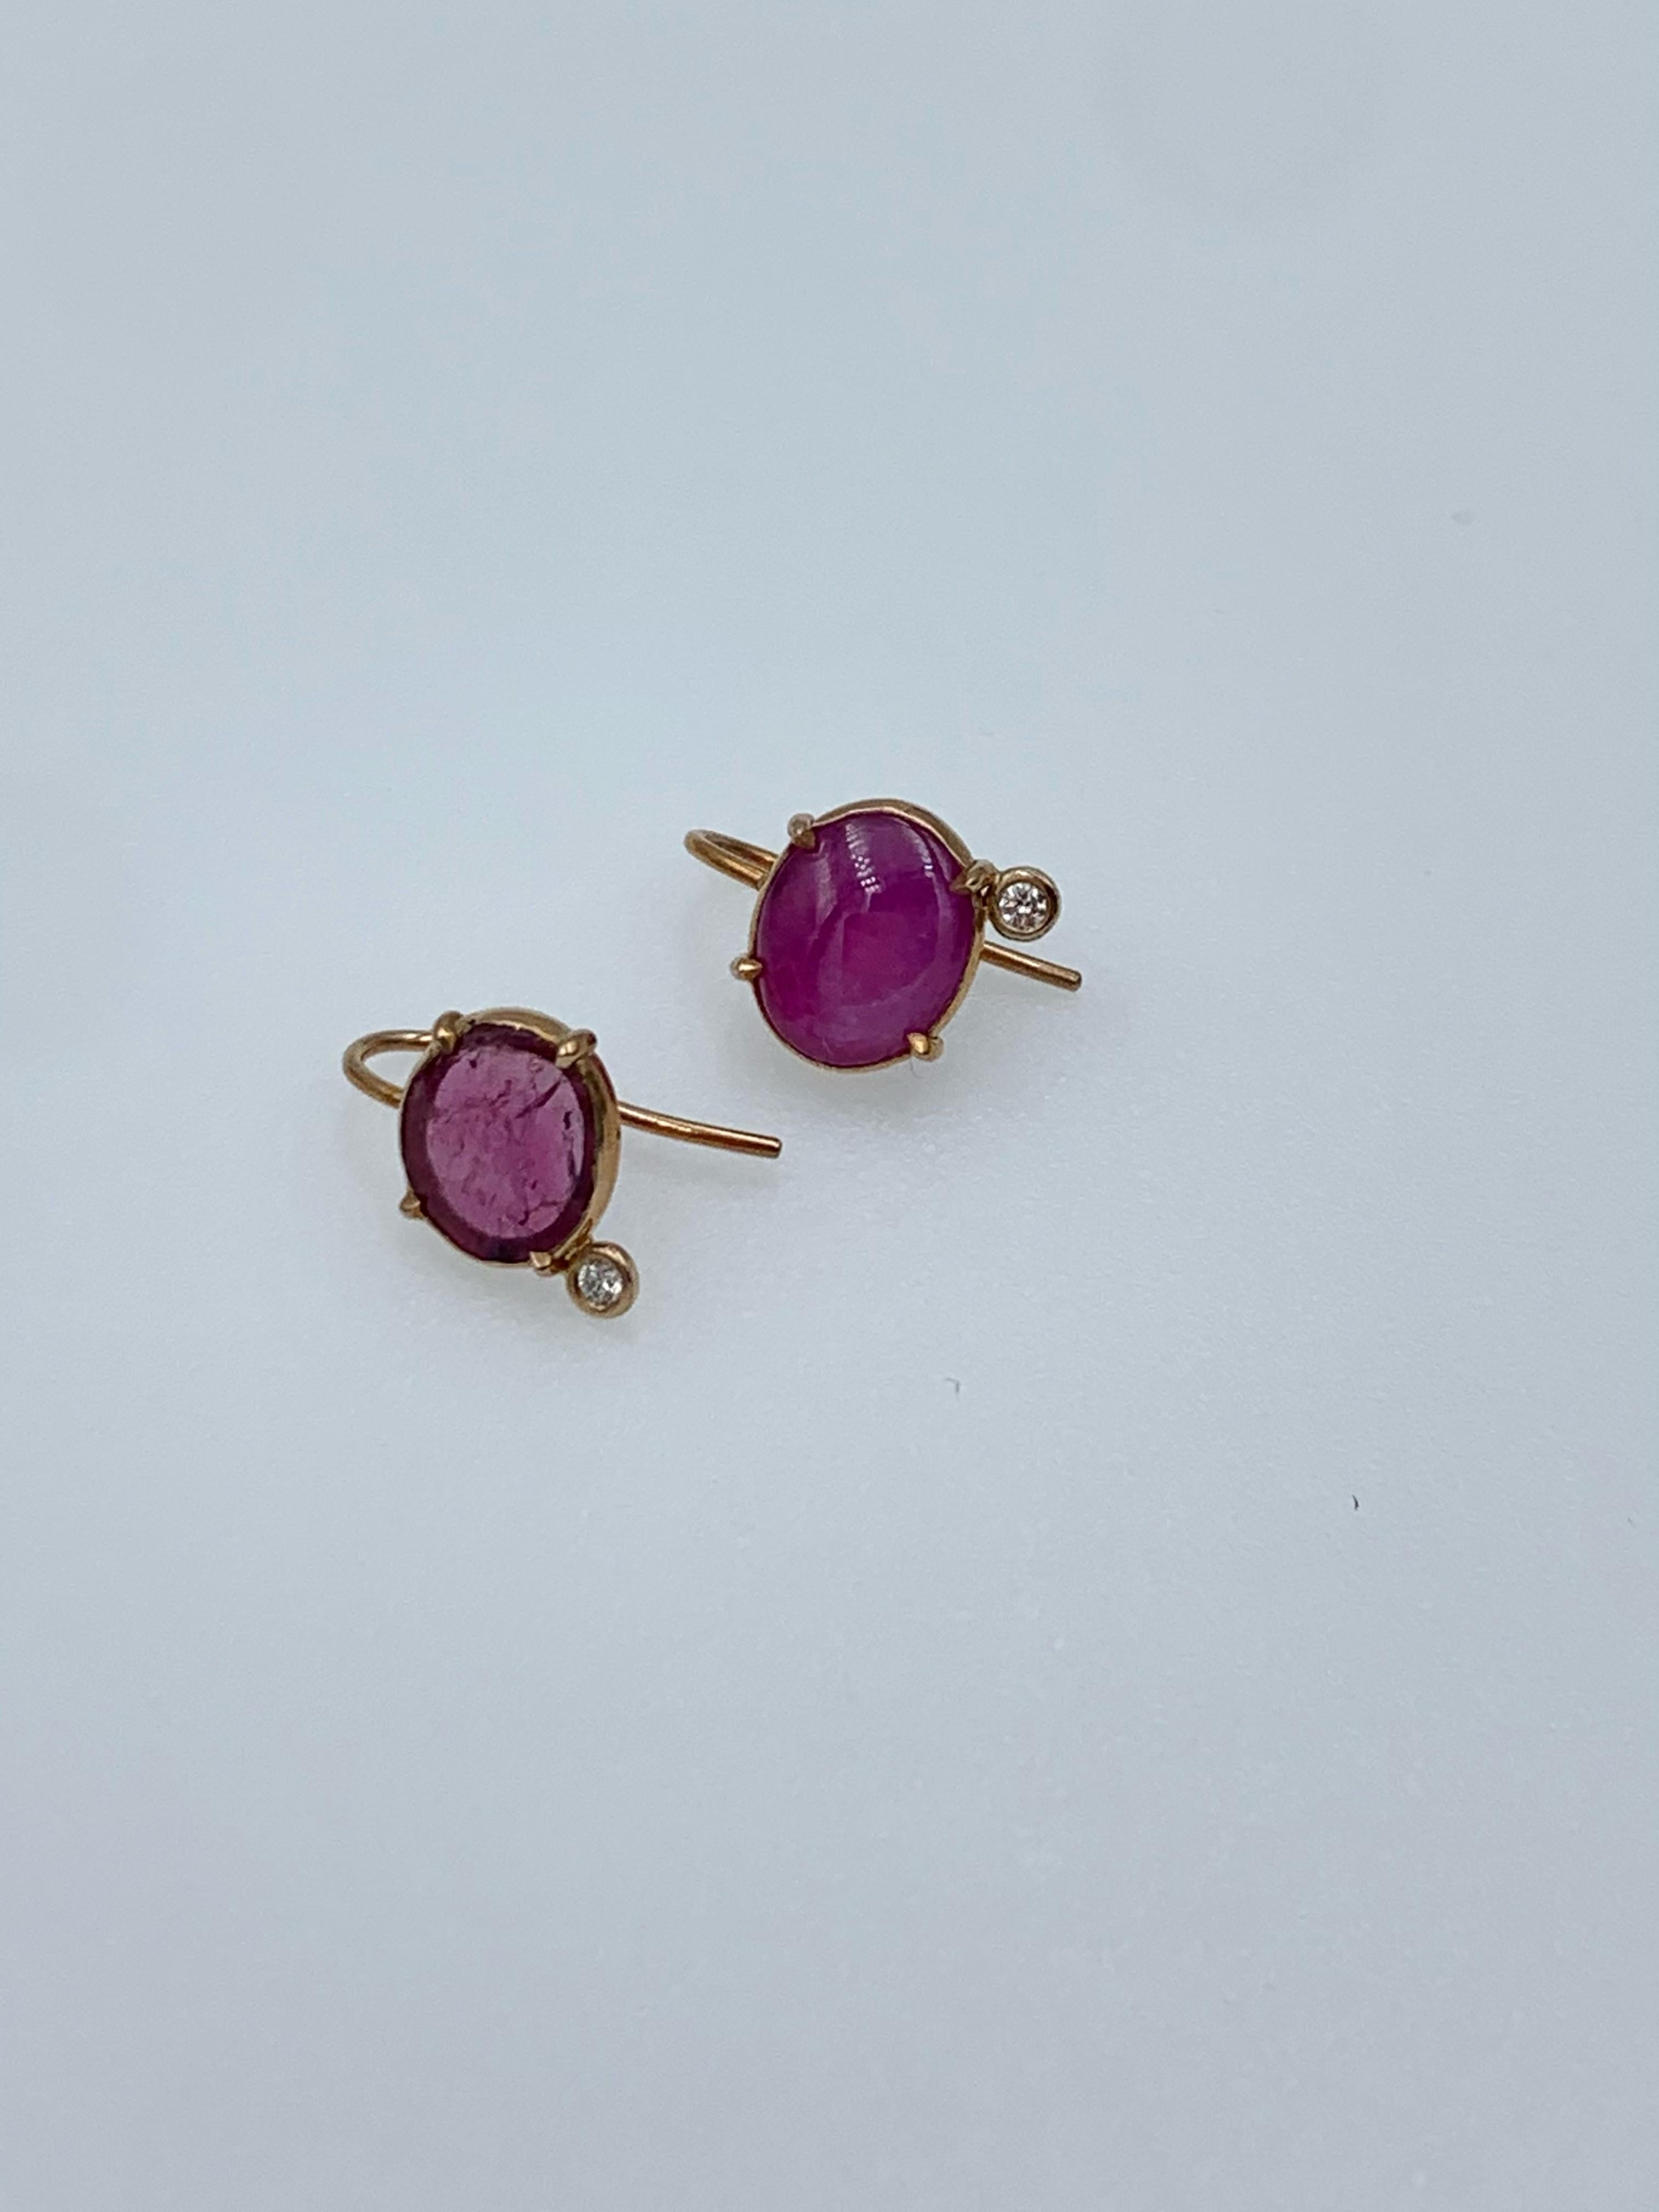 These unique earrings are hand made from 9 karat rose gold, one has a rose cut Ruby slice and the other is a Ruby cabochon, both with a small 2 point diamond (or .02 carats) to one side. They are set to hang delicately off the ear with a shepherds